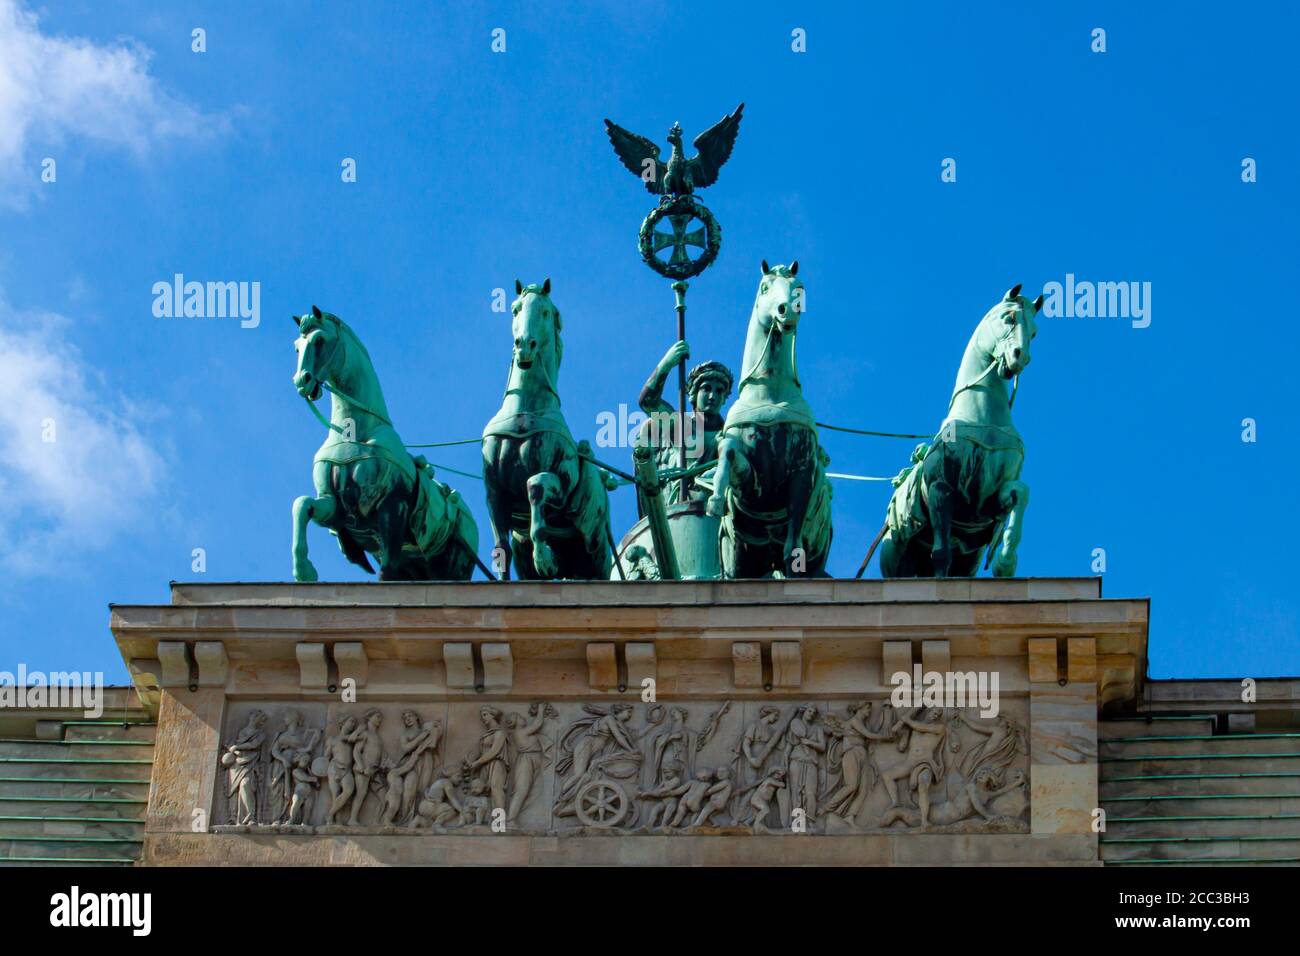 A Close Up View Of The Quadriga That Stands On Top Of The Iconic Brandenburg Gate In Berlin The Statue Features A Goddess Victoria Driving A Four H Stock Photo Alamy